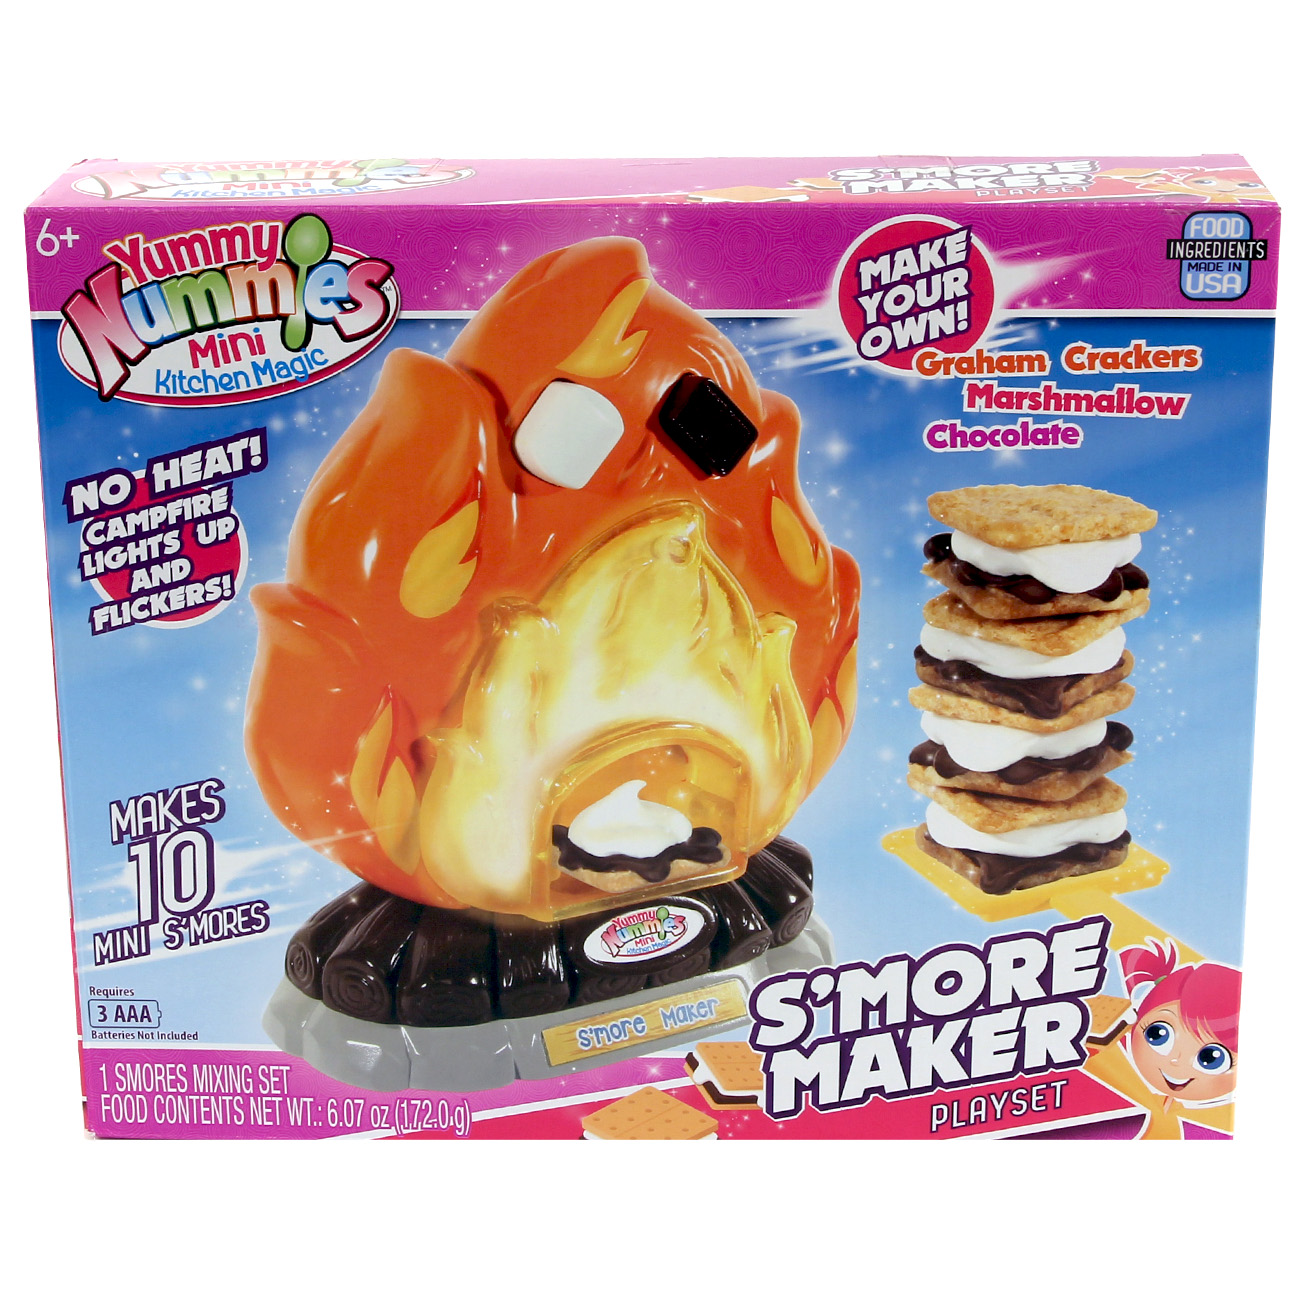 S'mores Maker Playset